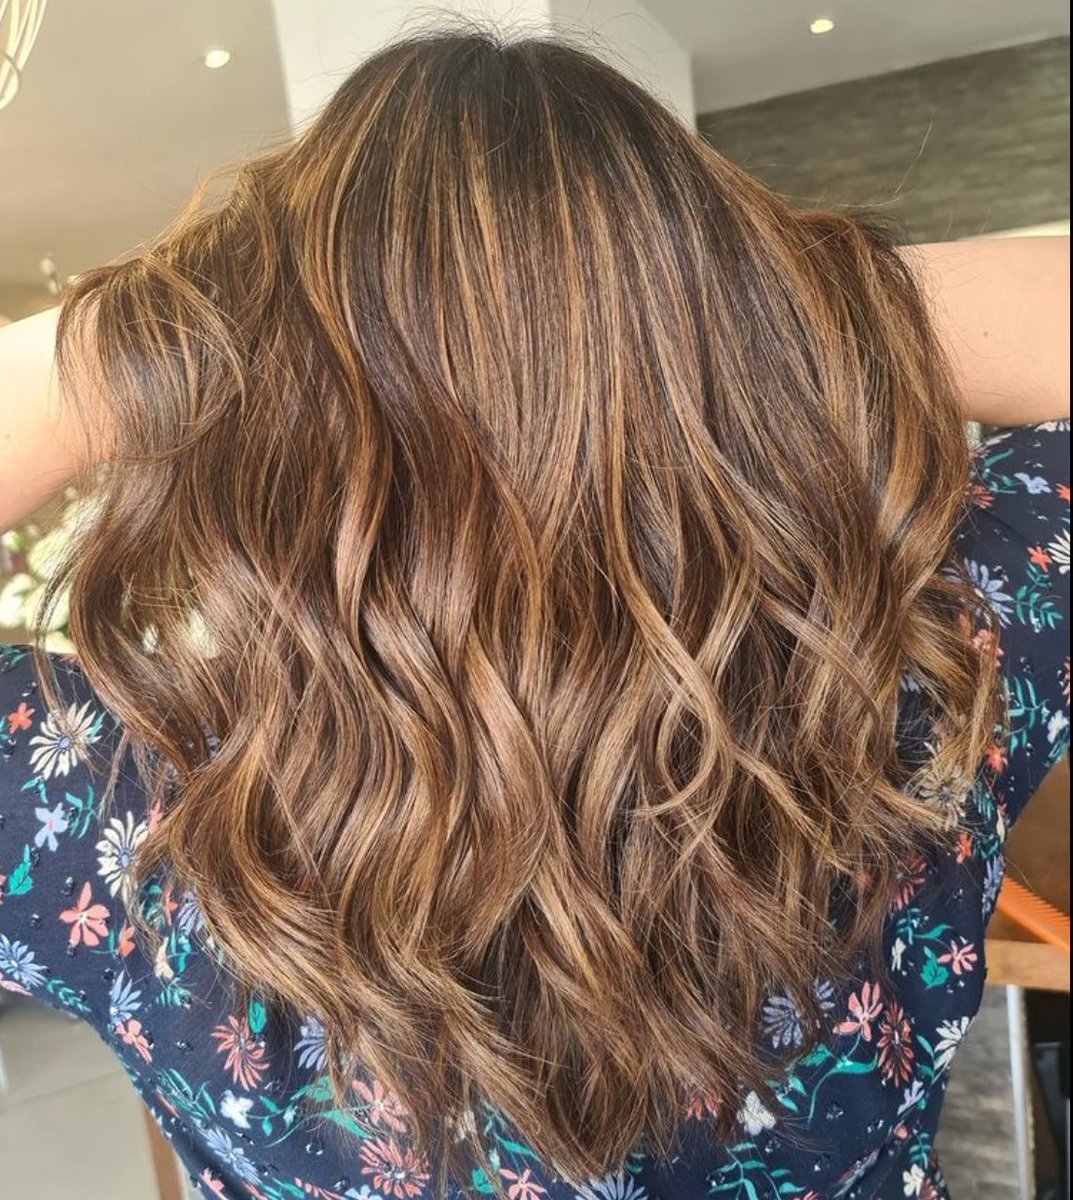 Mahsa - It’s not all about the blonde, sit back and enjoy the espresso. Gorgeous tones by @pkaihair Market Deeping Stylist Mahsa. Book with Mahsa via the PKai Salons app, available in your App Store. #haircare #peterboroughsalon #peterboroughuk #pkaihair